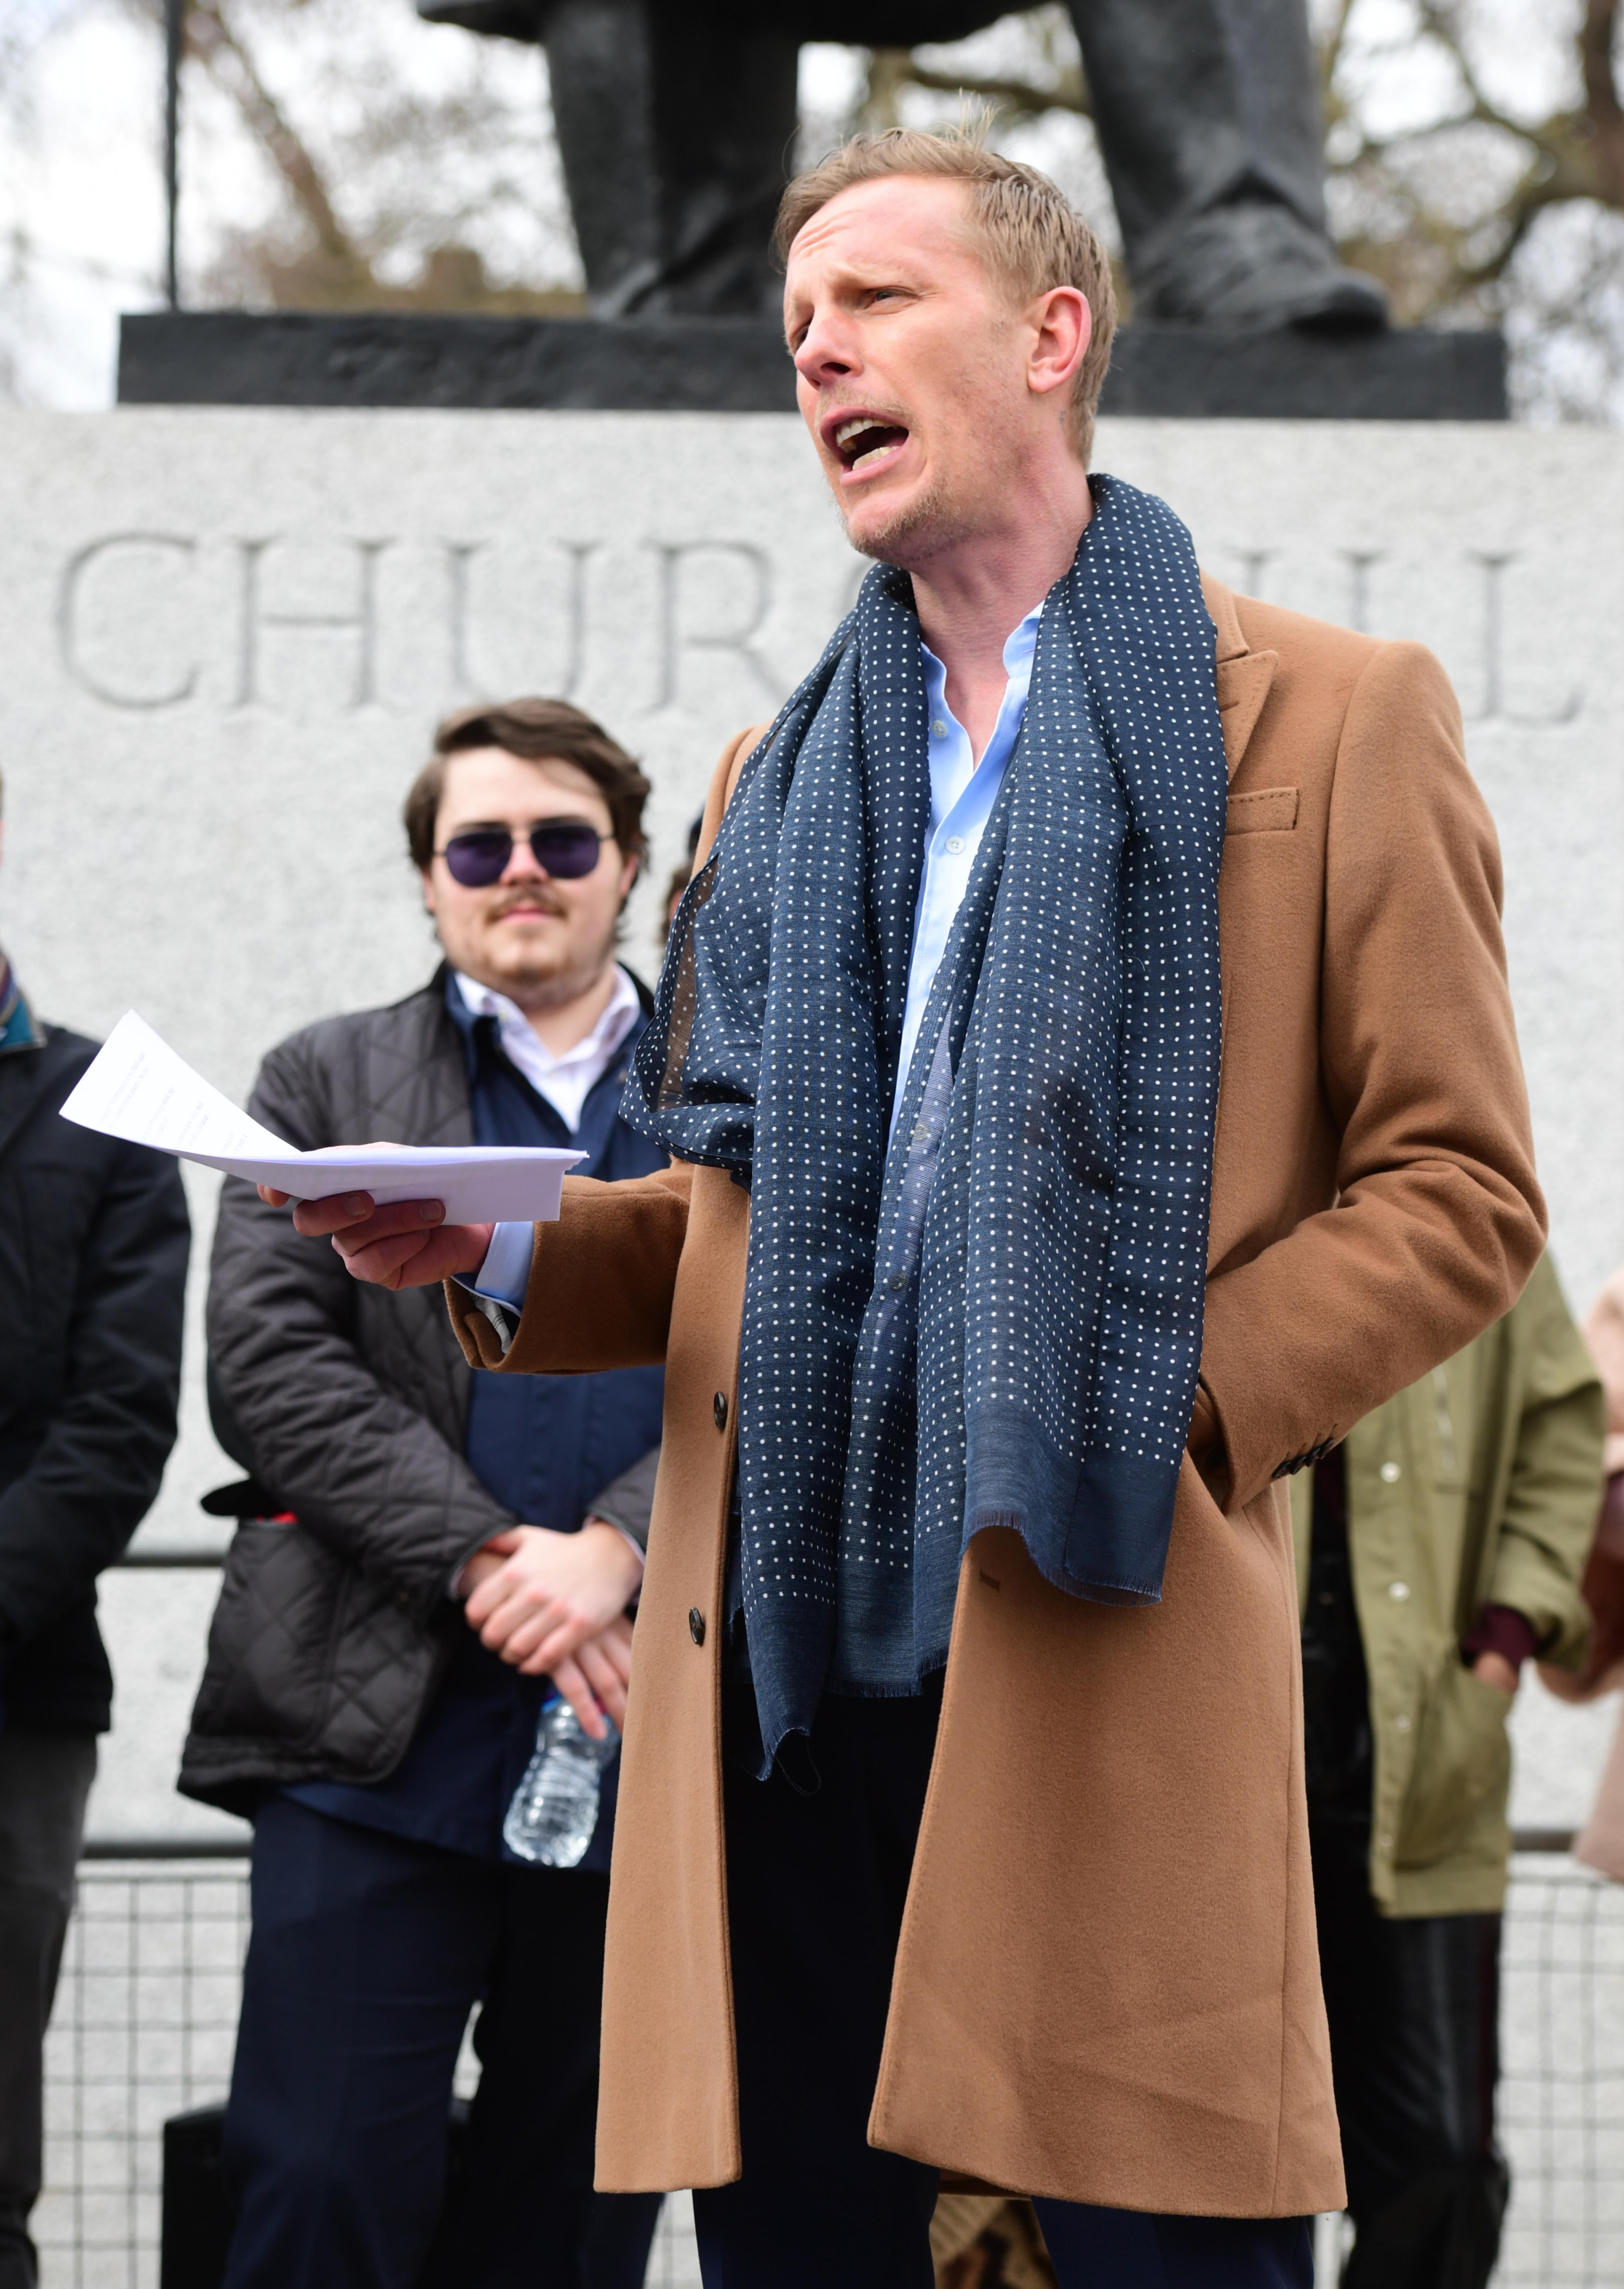 Leader of the Reclaim Party Laurence Fox says he is not racist (Ian West/PA)